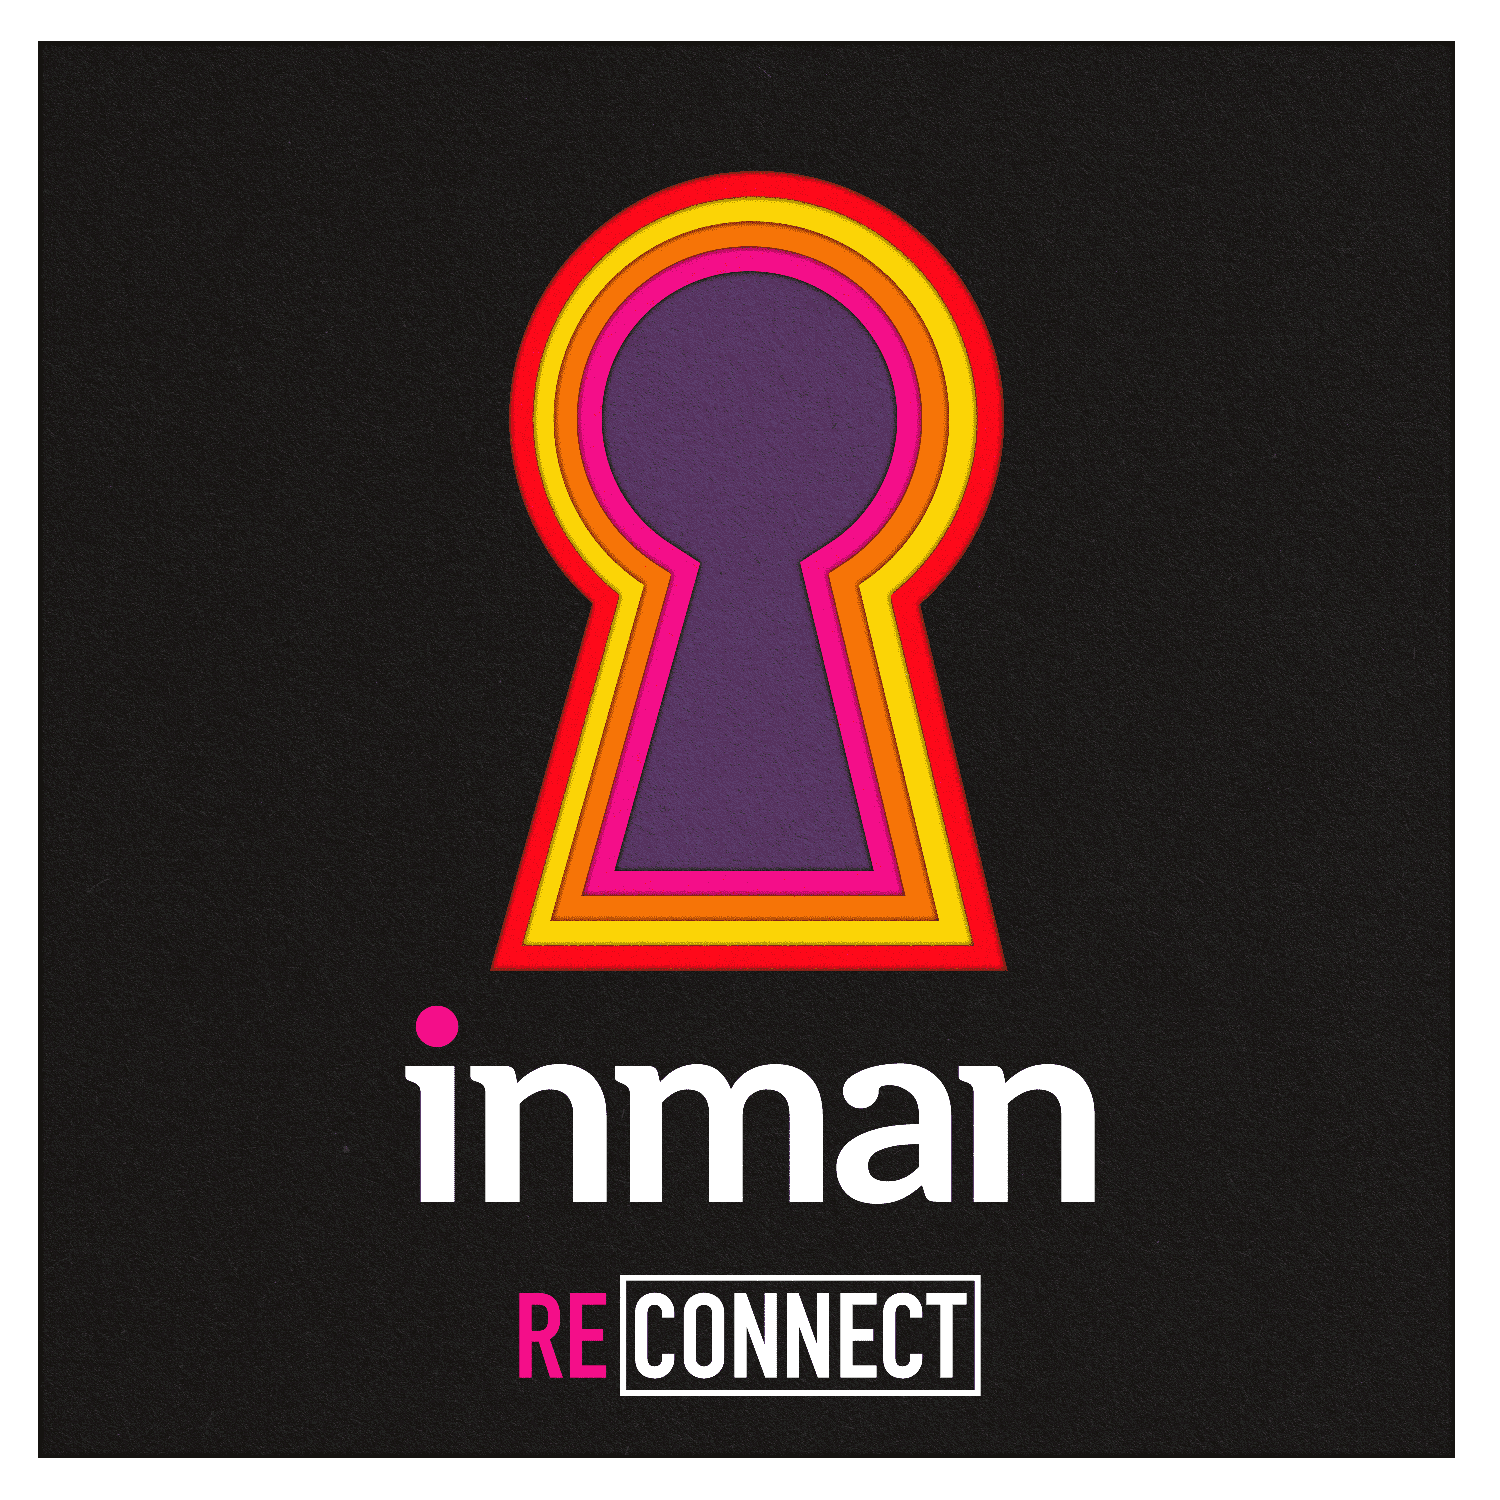 inman-reconnect-1-1-1-1-min